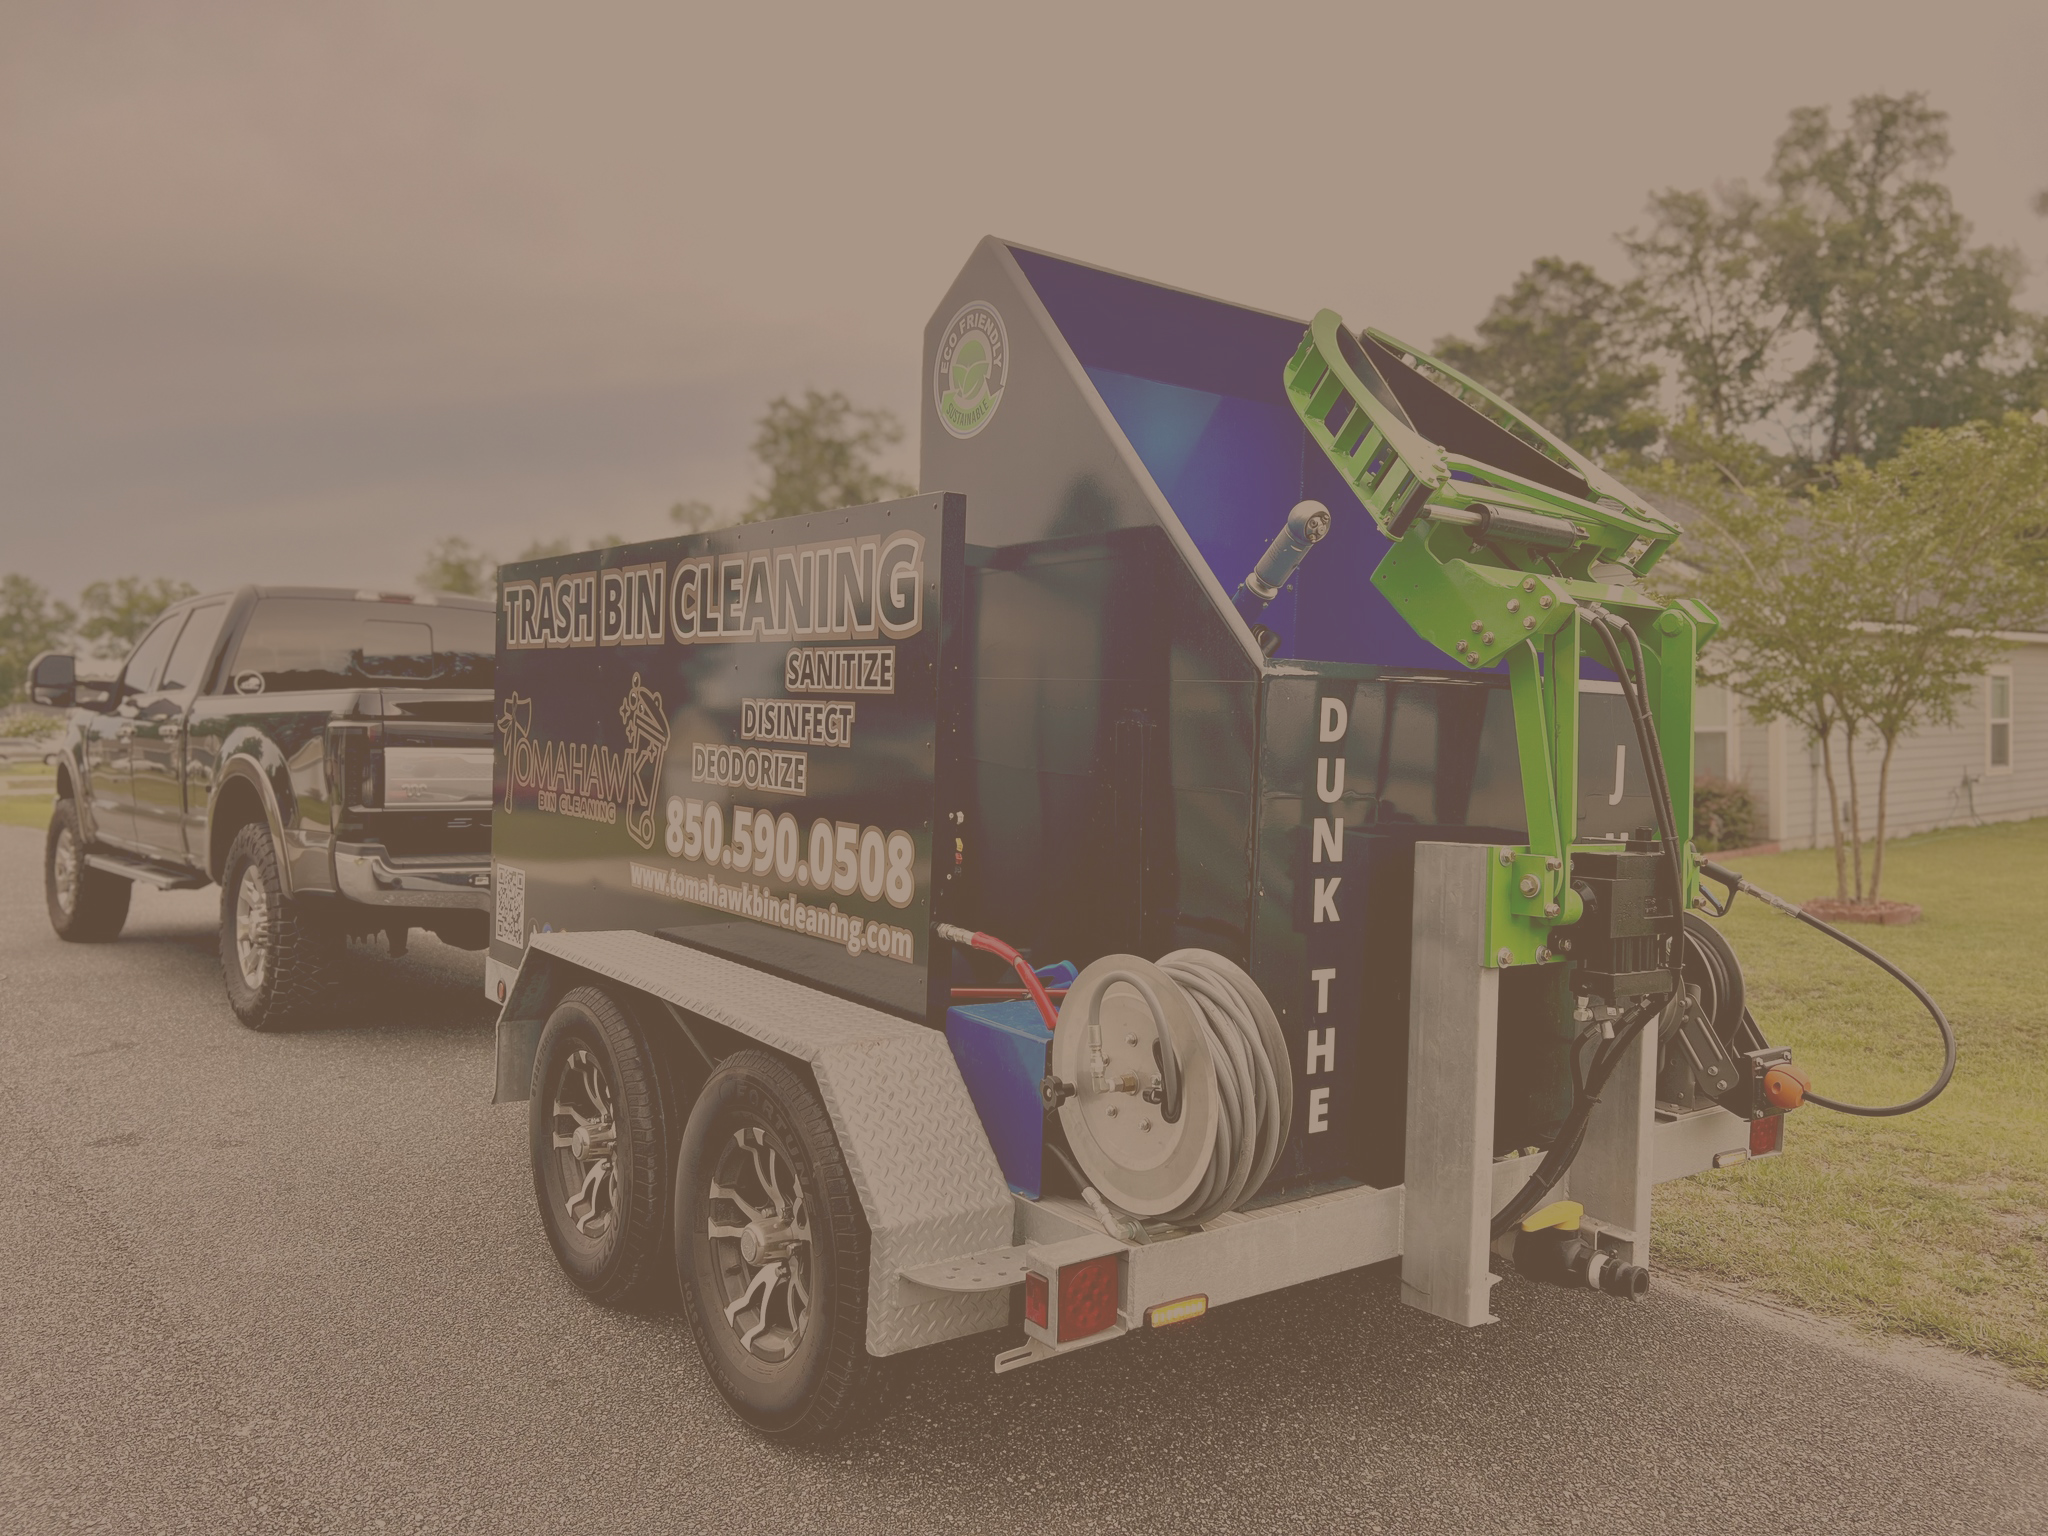 images/Tomahawk-Bin-Cleaning-Services-for-FLORIDA.jpg